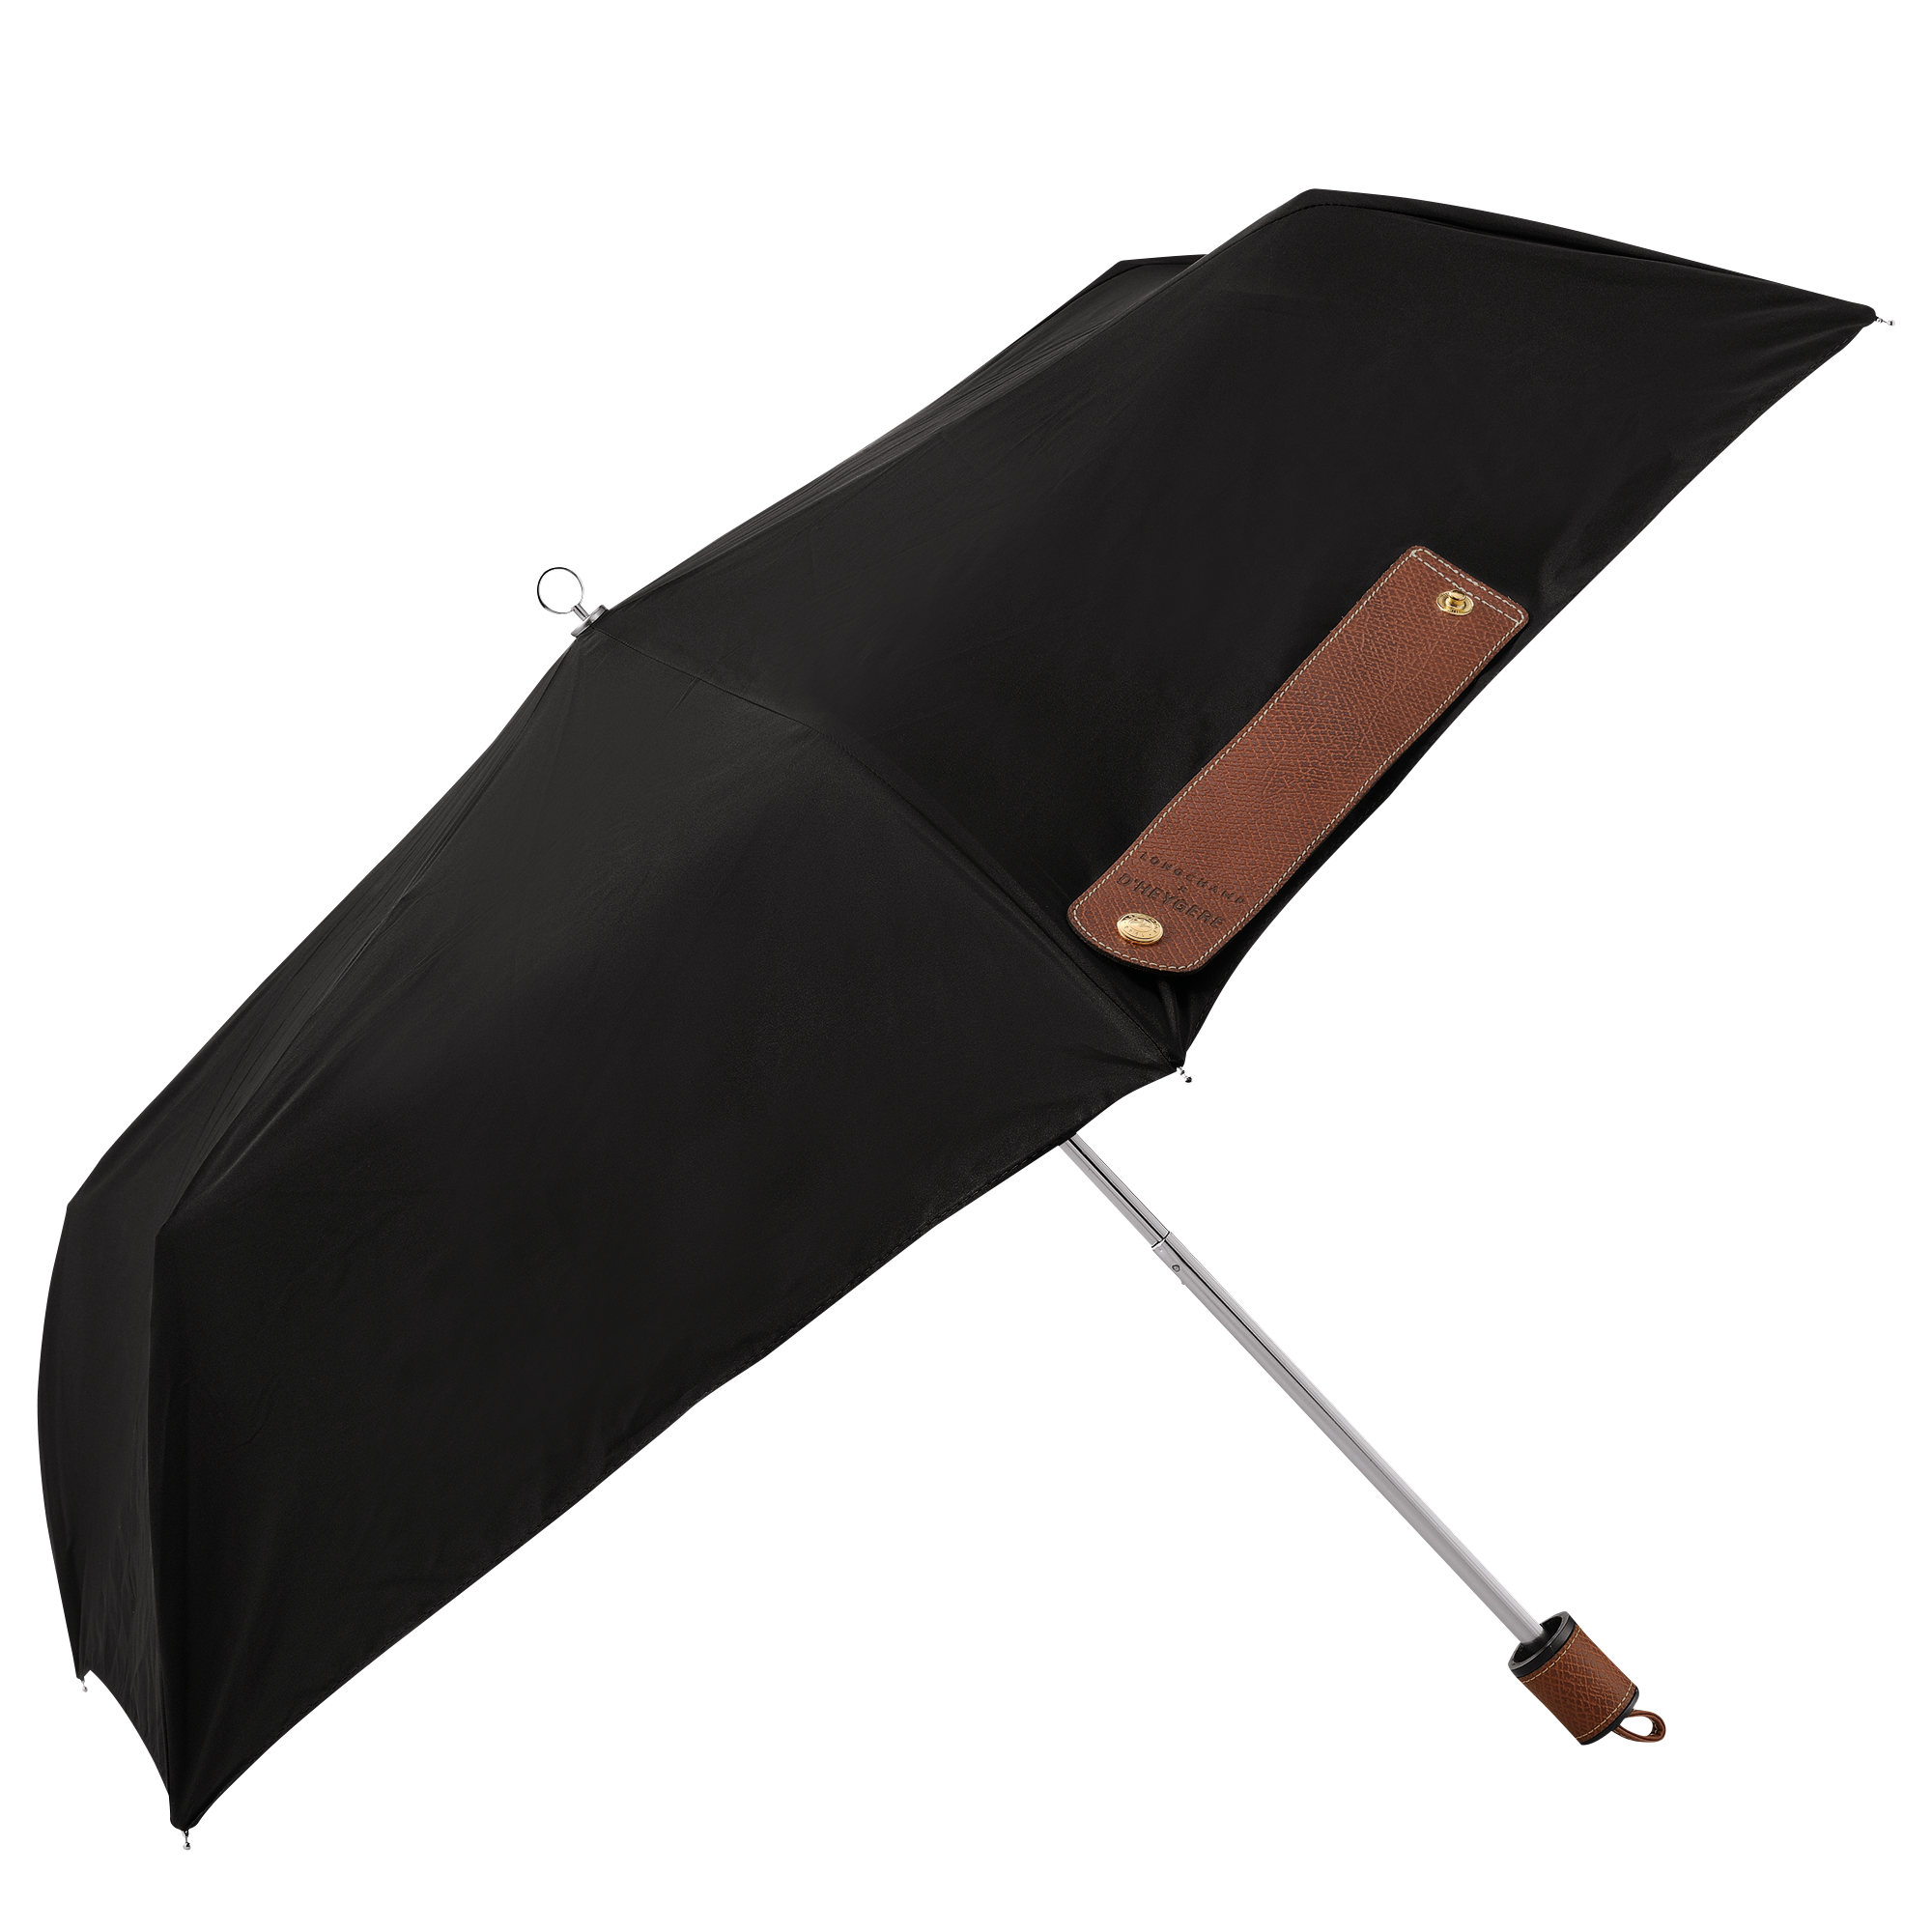 Longchamp X D_heygere black umbrella with strap  Php 12,500.png